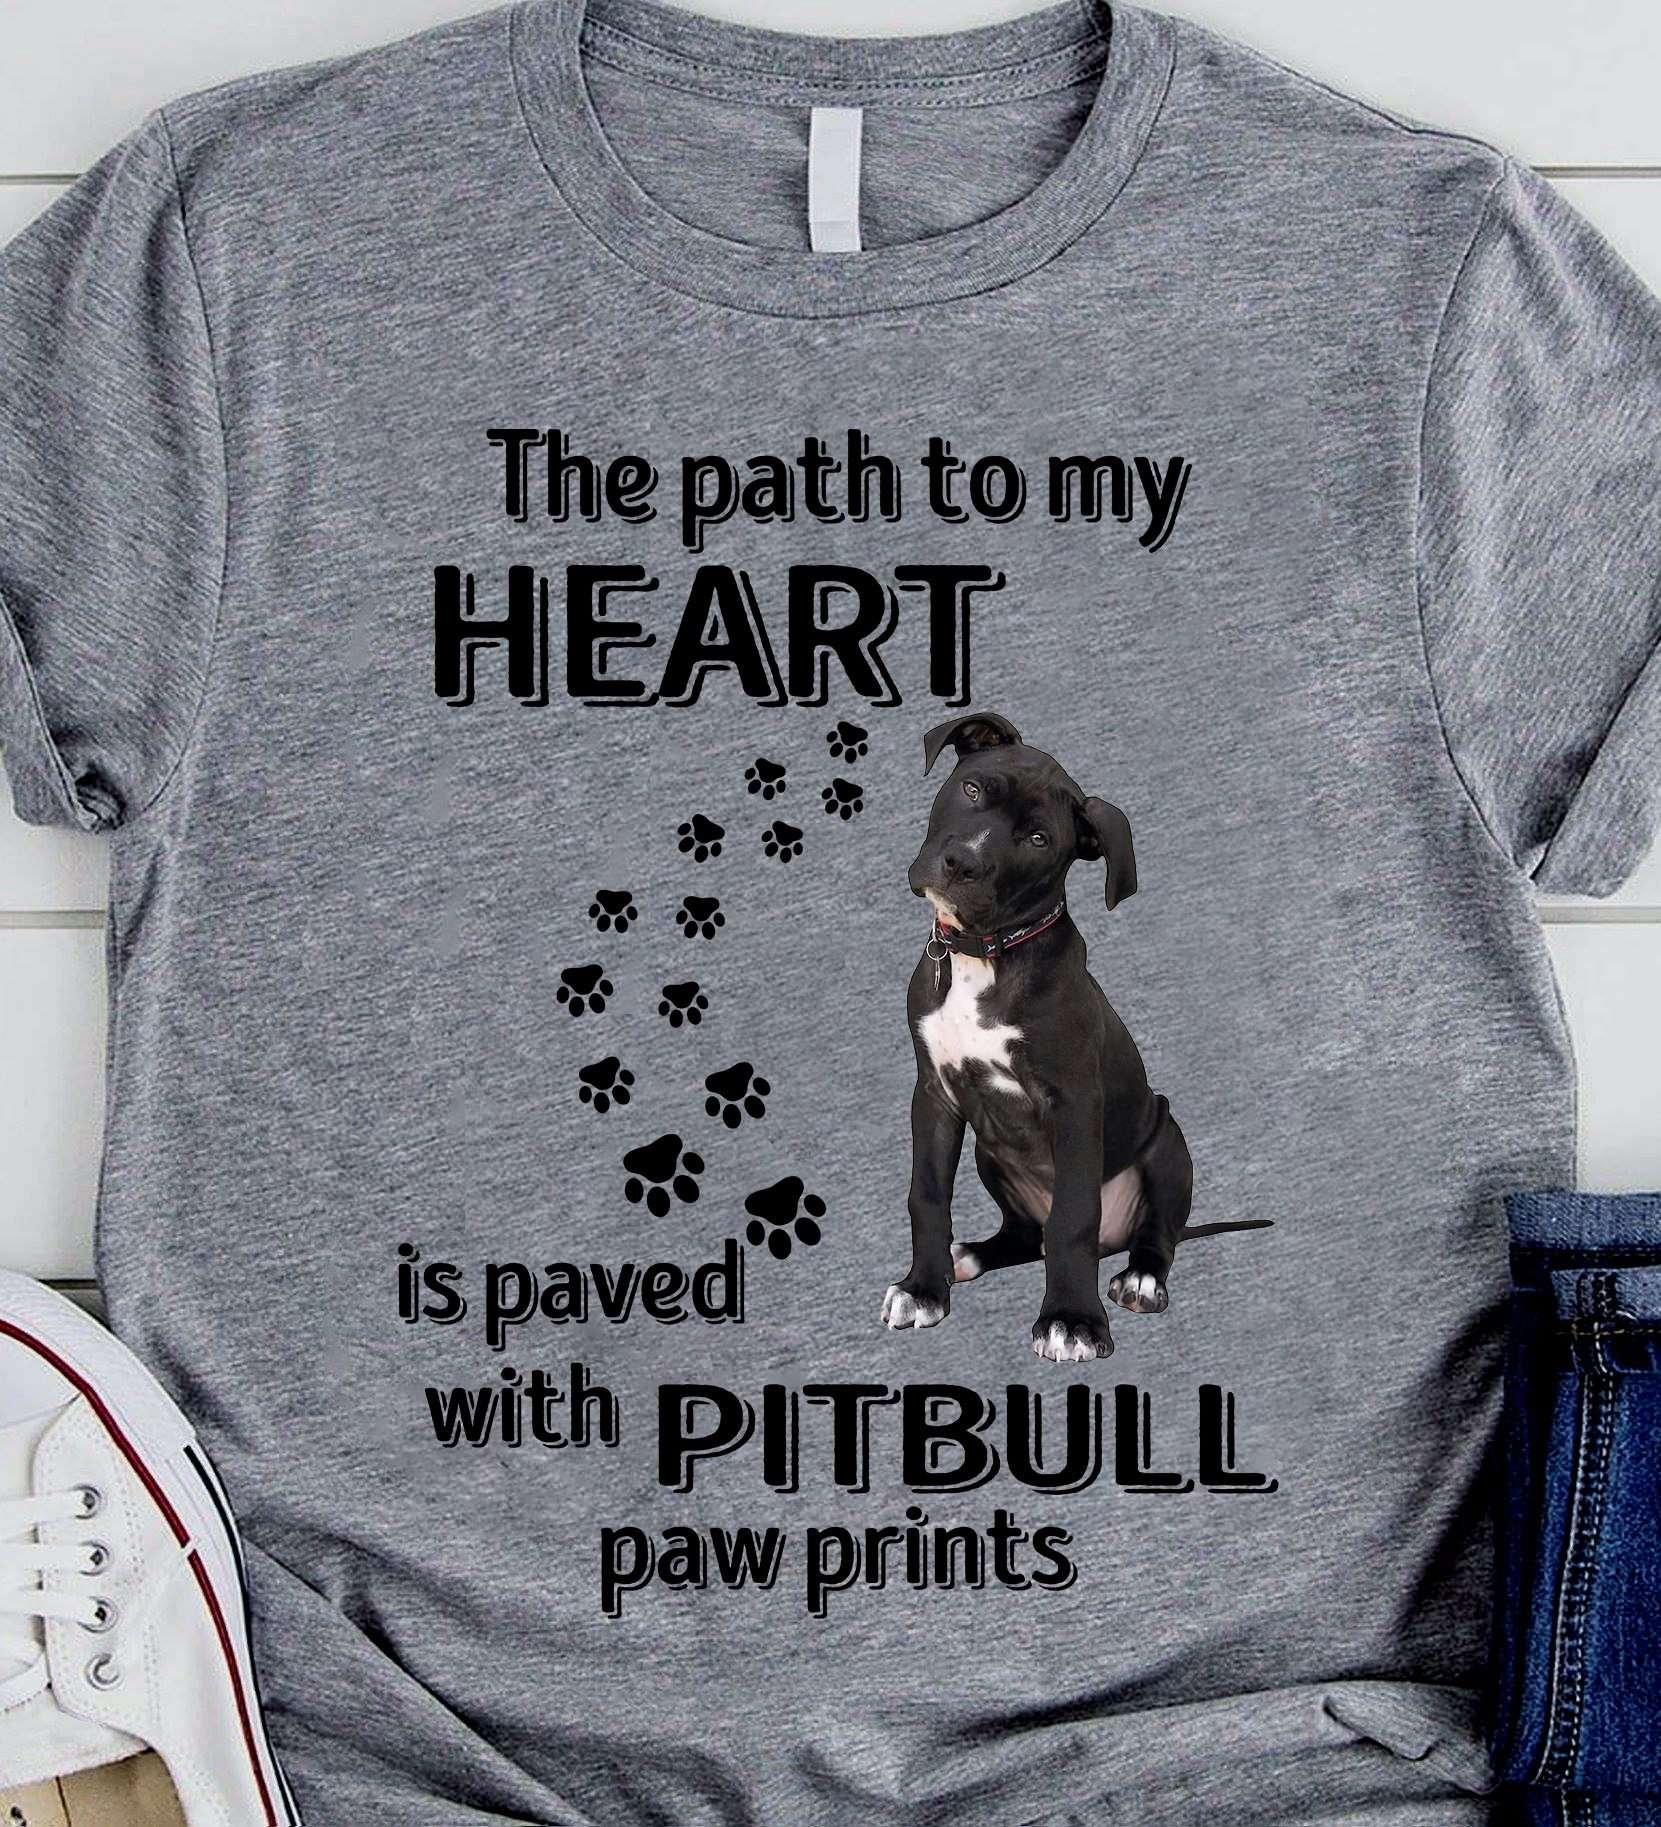 Pitbull Dog - The path to my heart is paved with pitbull paw prints